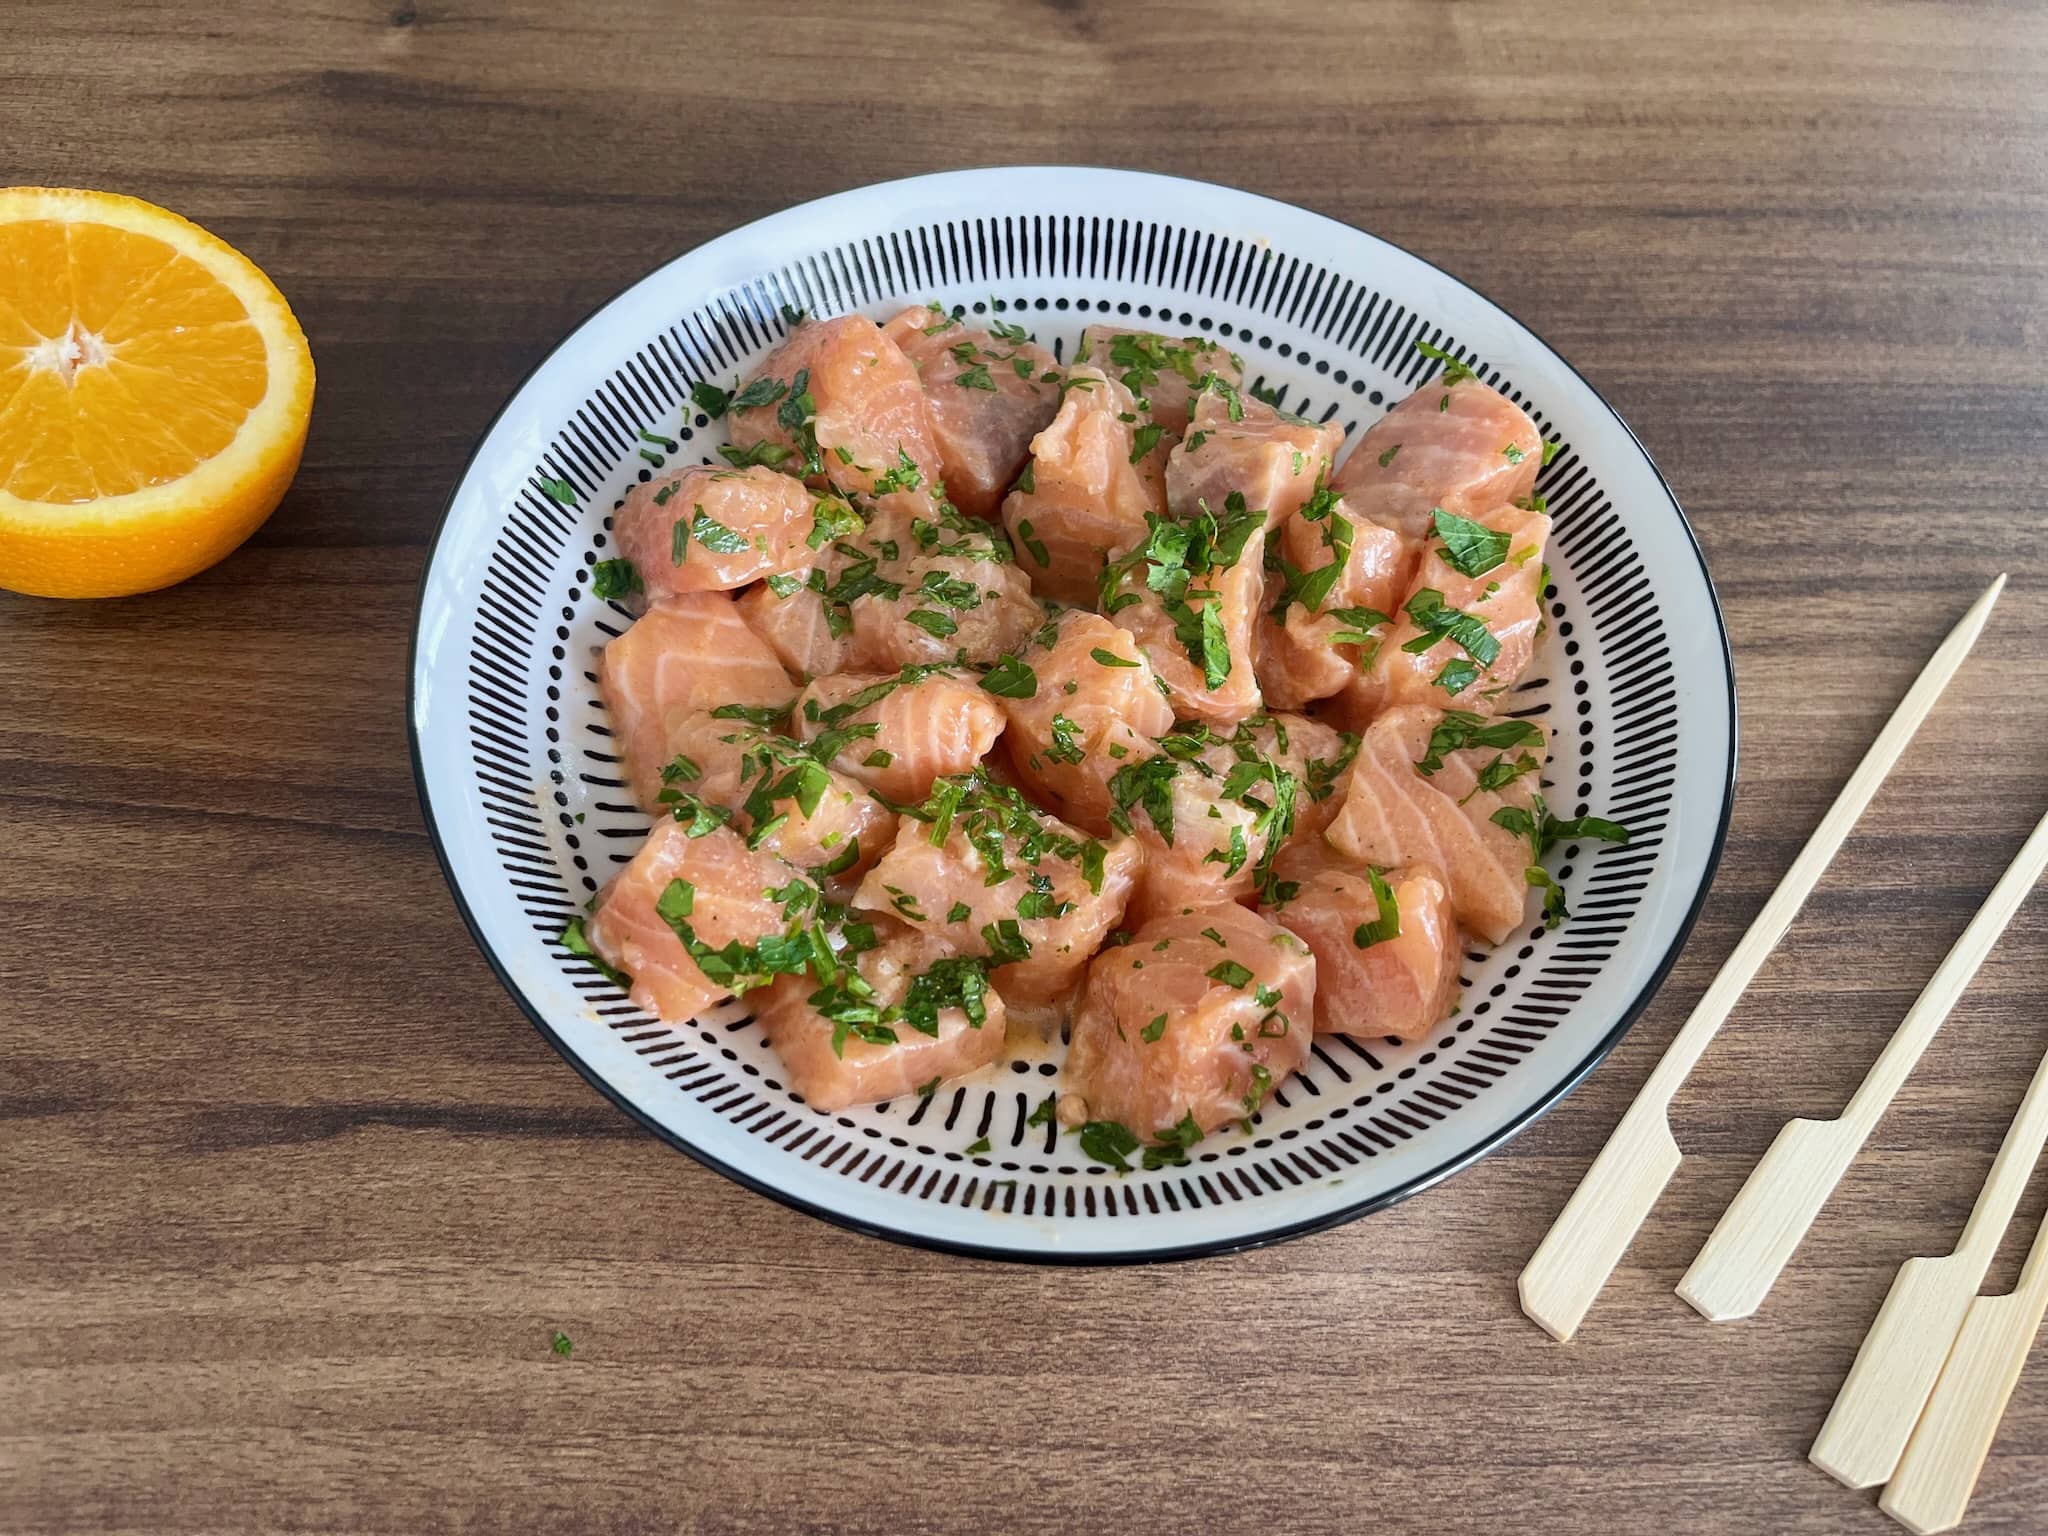 Marinated cubes of salmon in a bowl